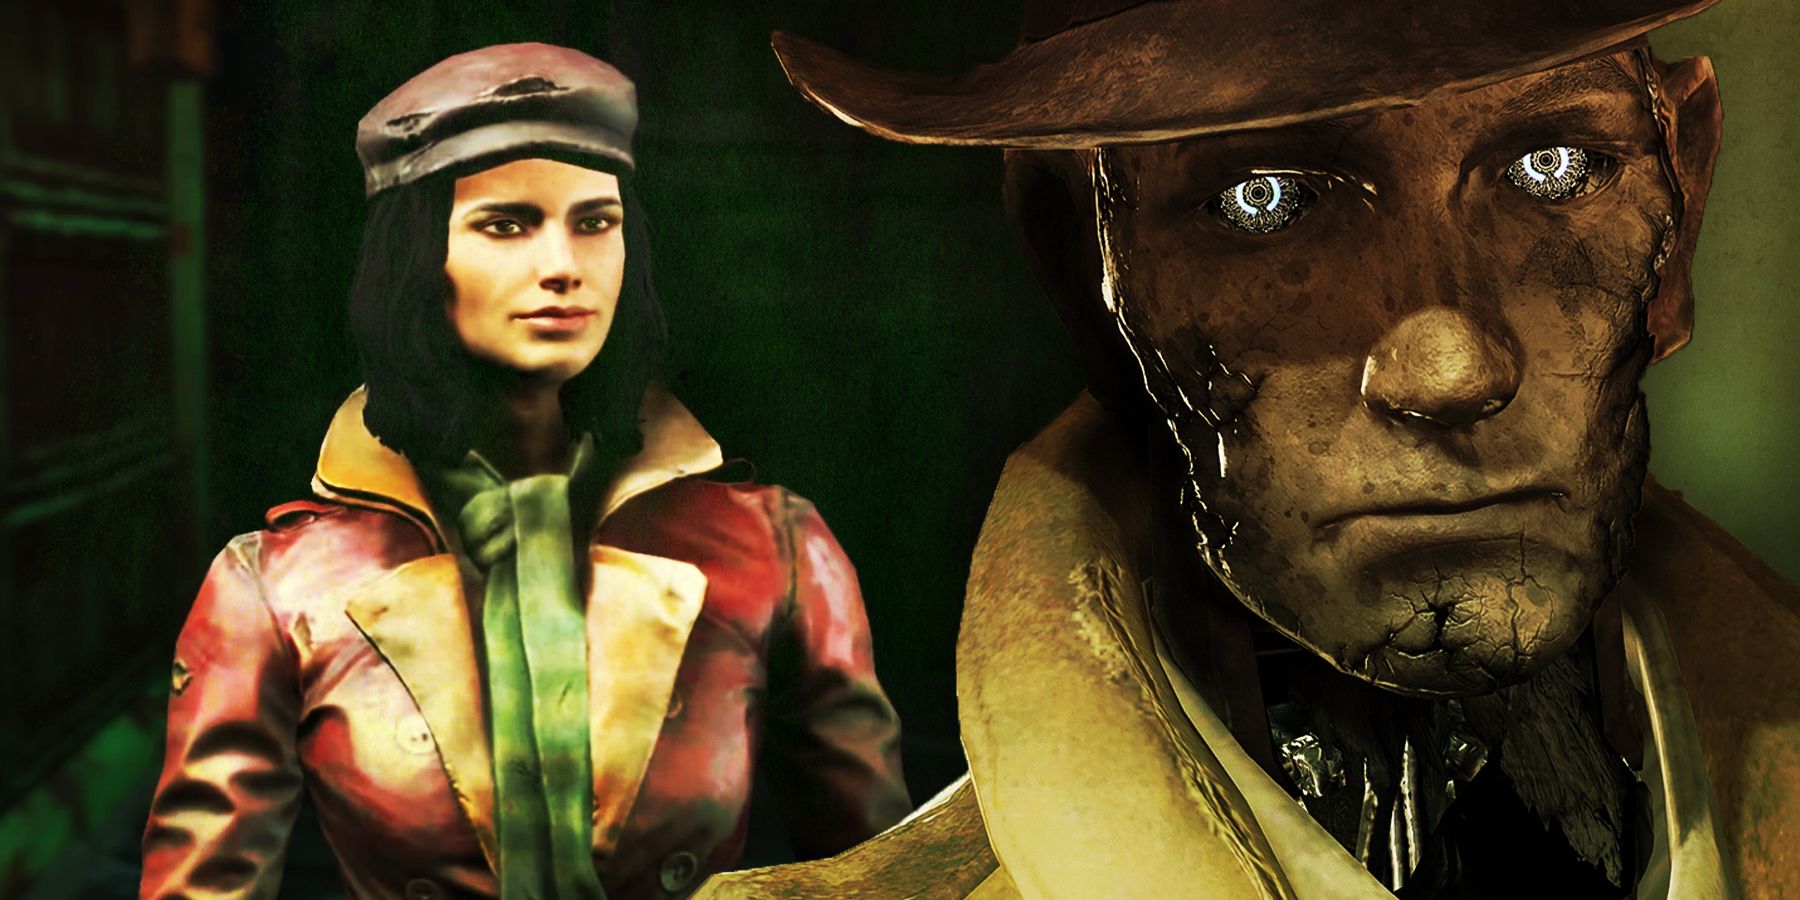 Fallout 3 Companions meet Fallout 4 - NV Companions are next in